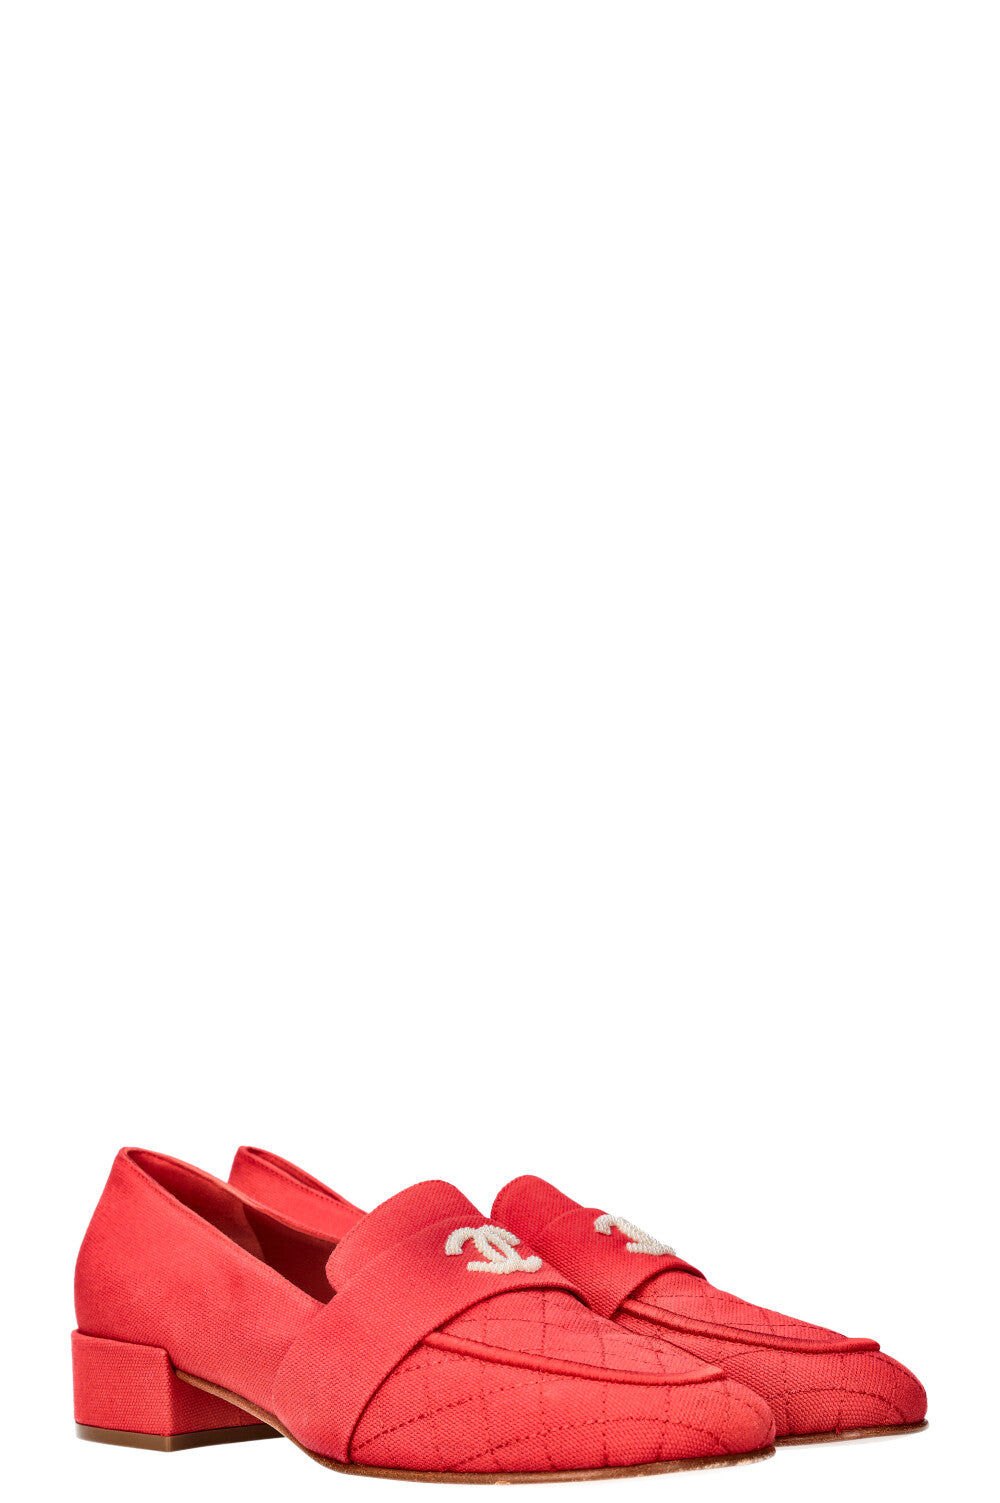 CHANEL Flats Diamond Quilted Canvas Red 